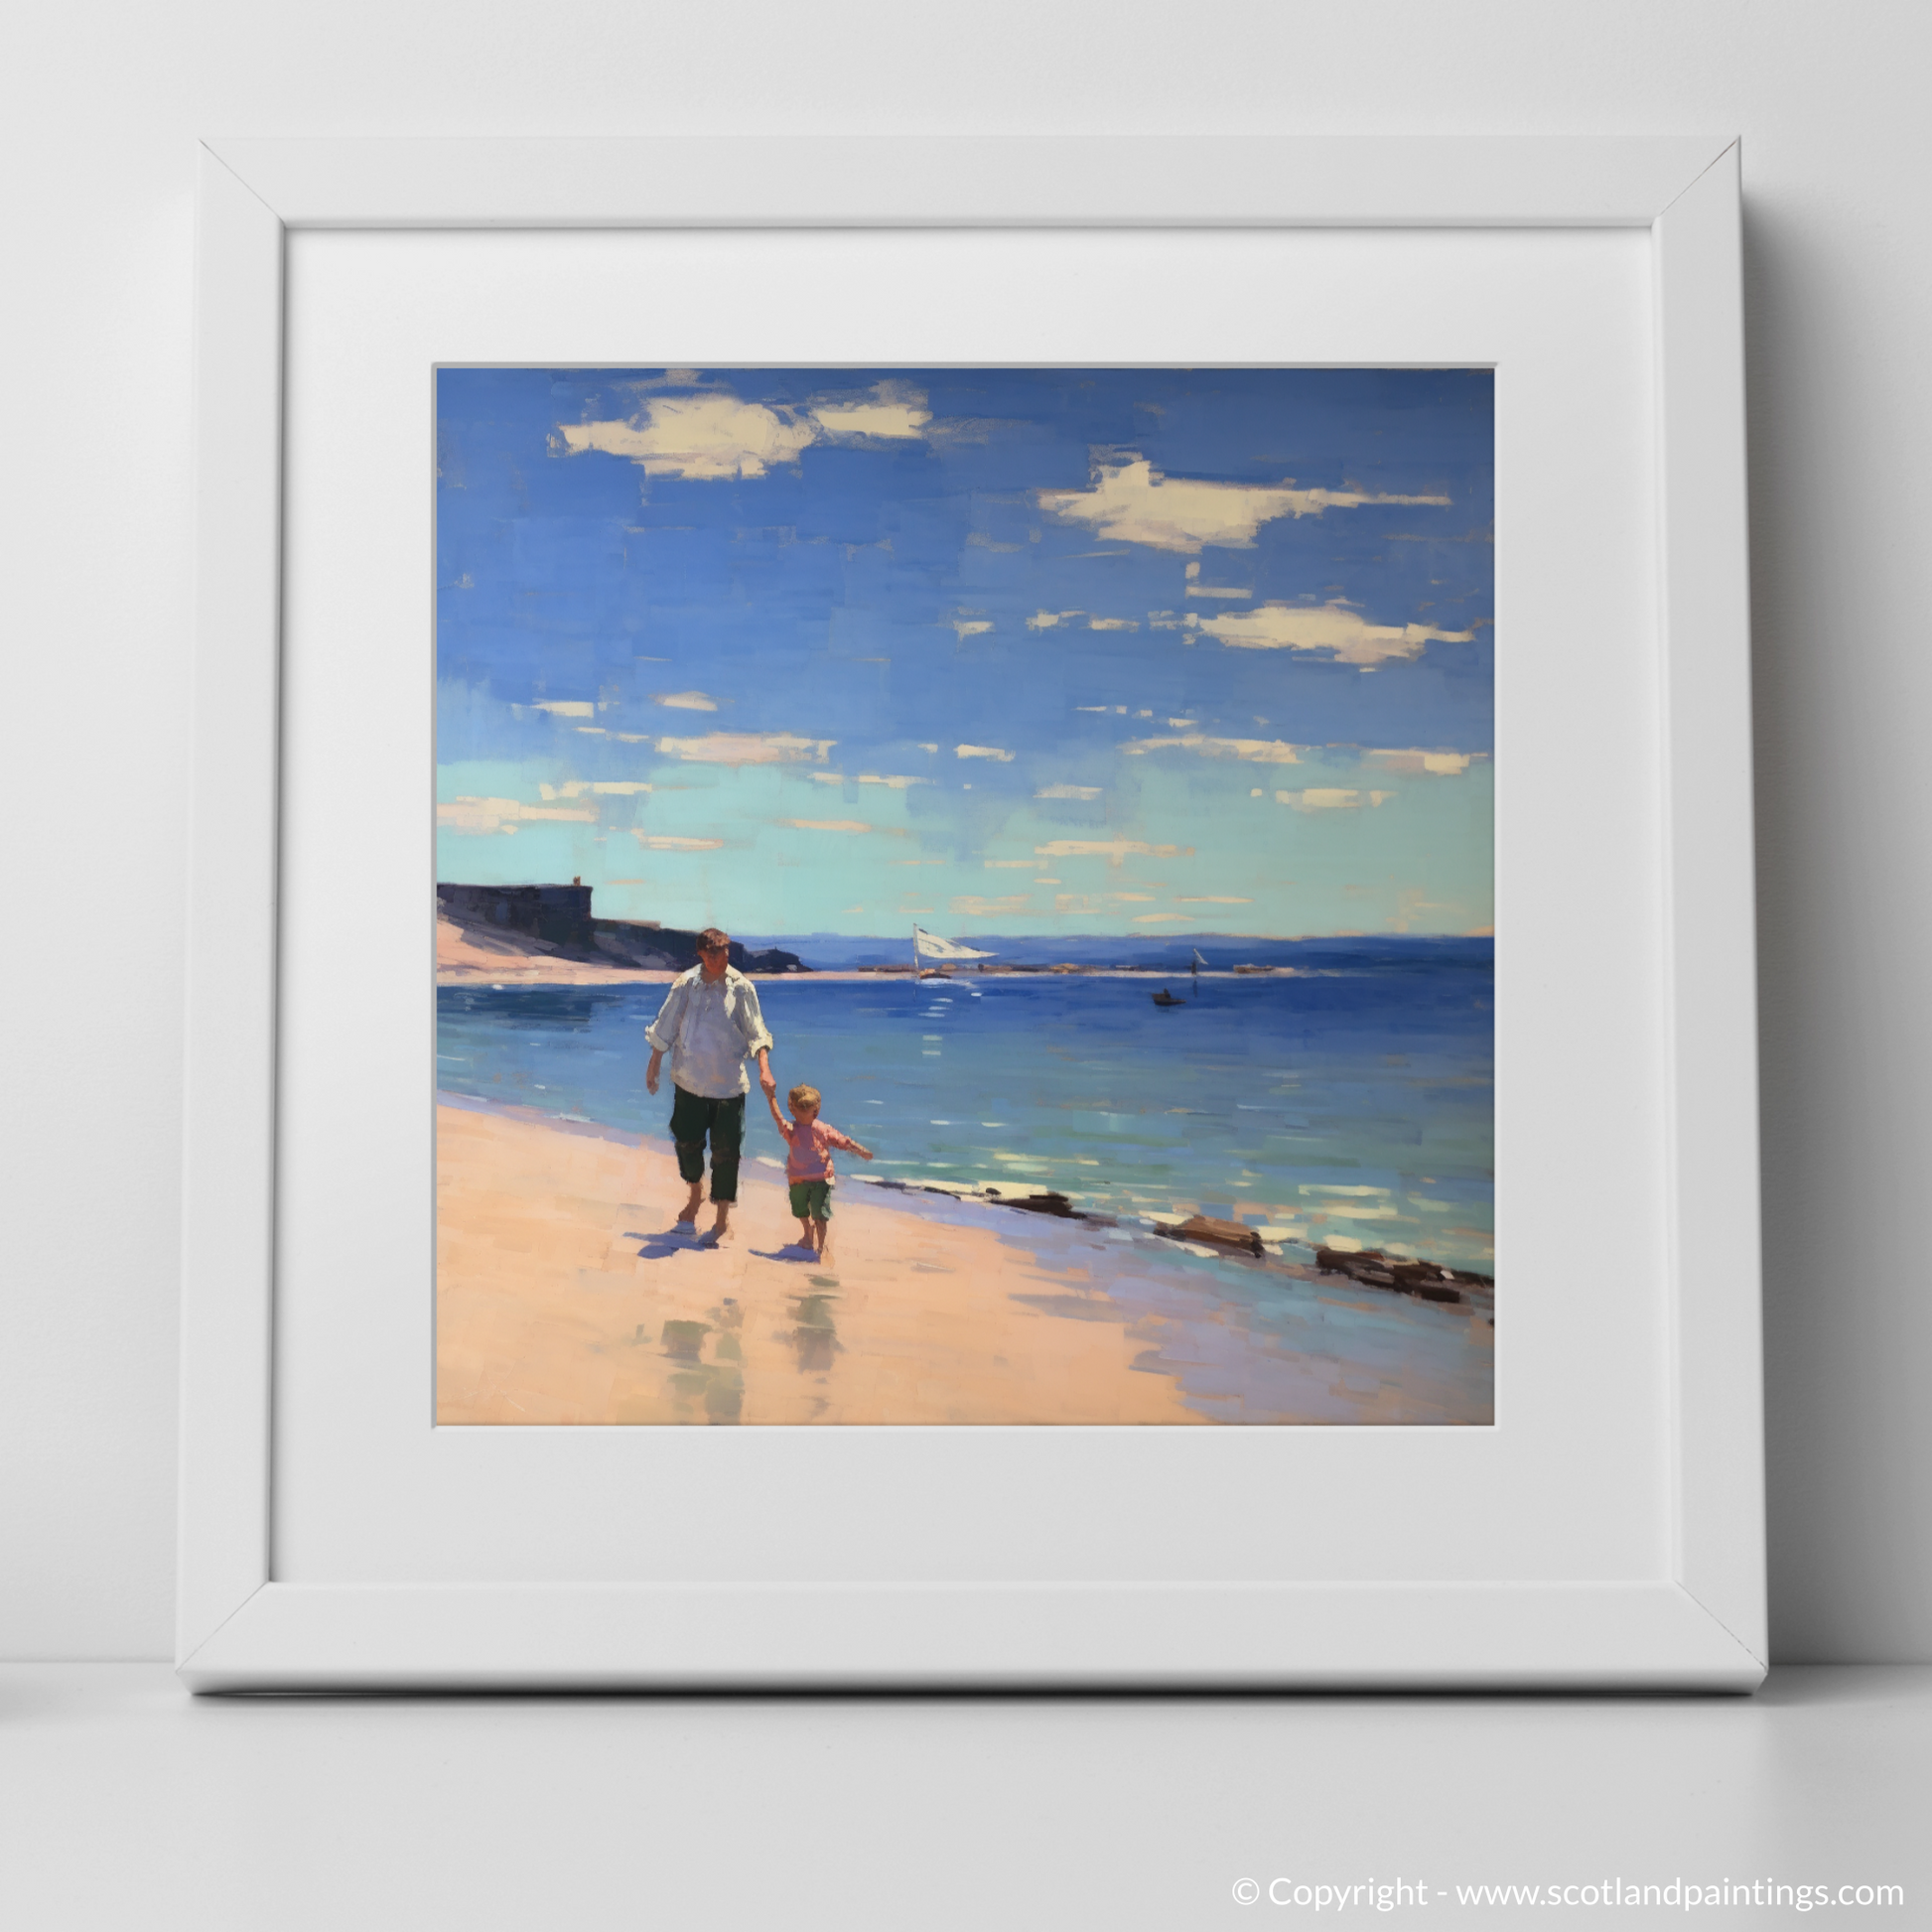 Art Print of A dad and son walking on Coldingham Bay with a white frame